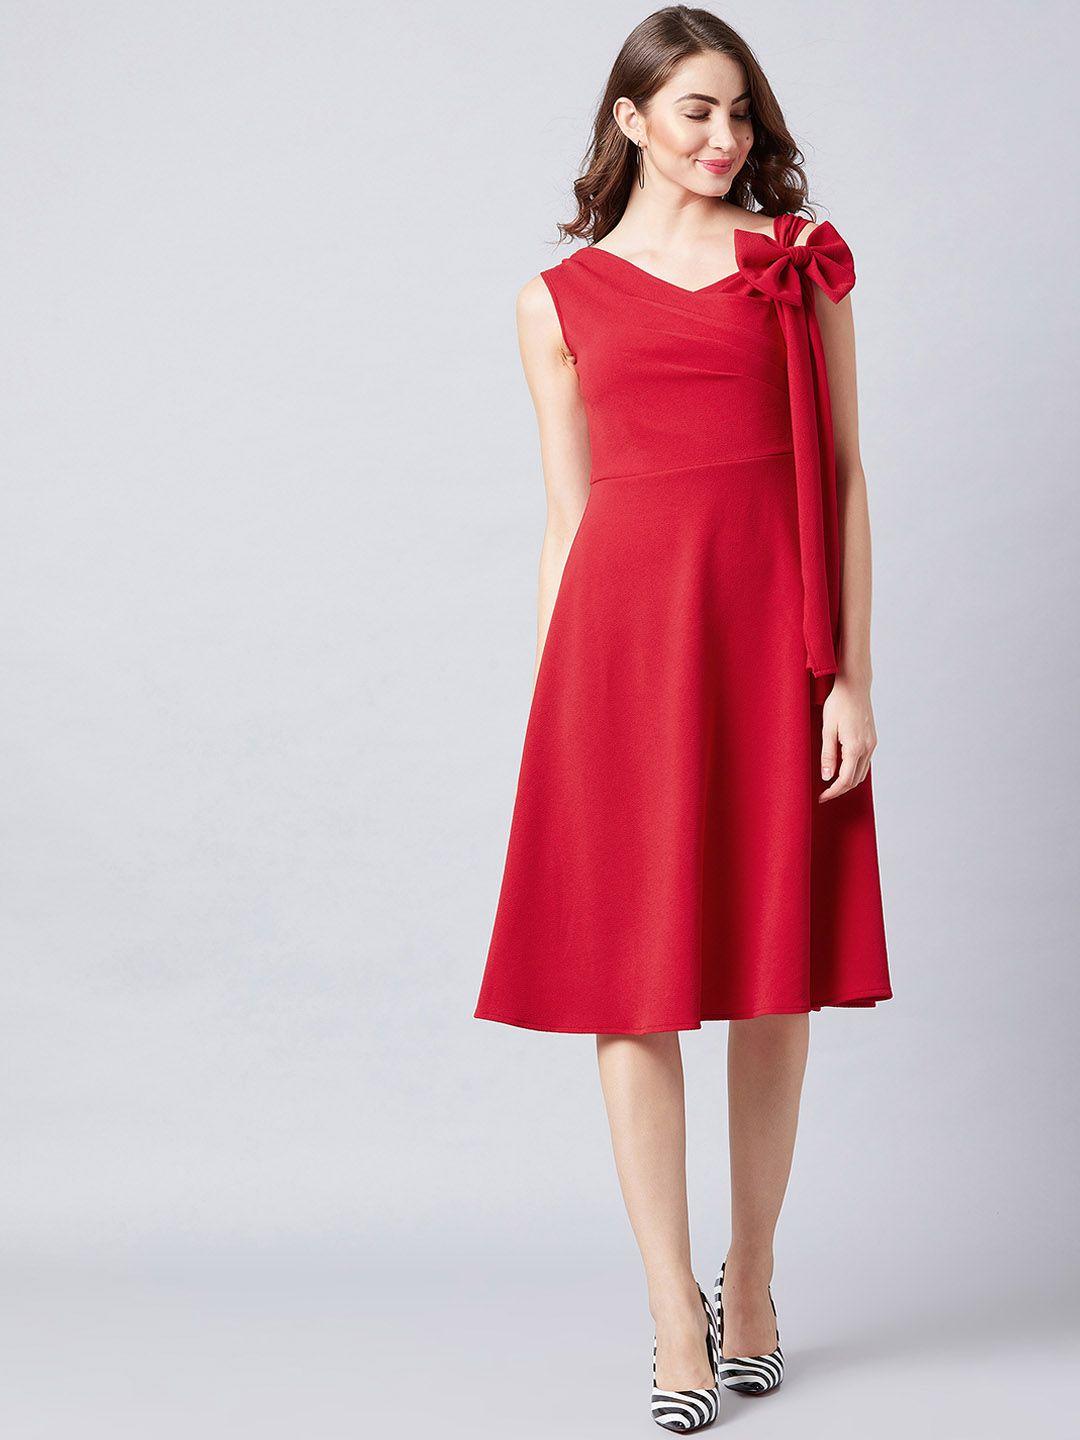 athena red v-neck fit and flare dress